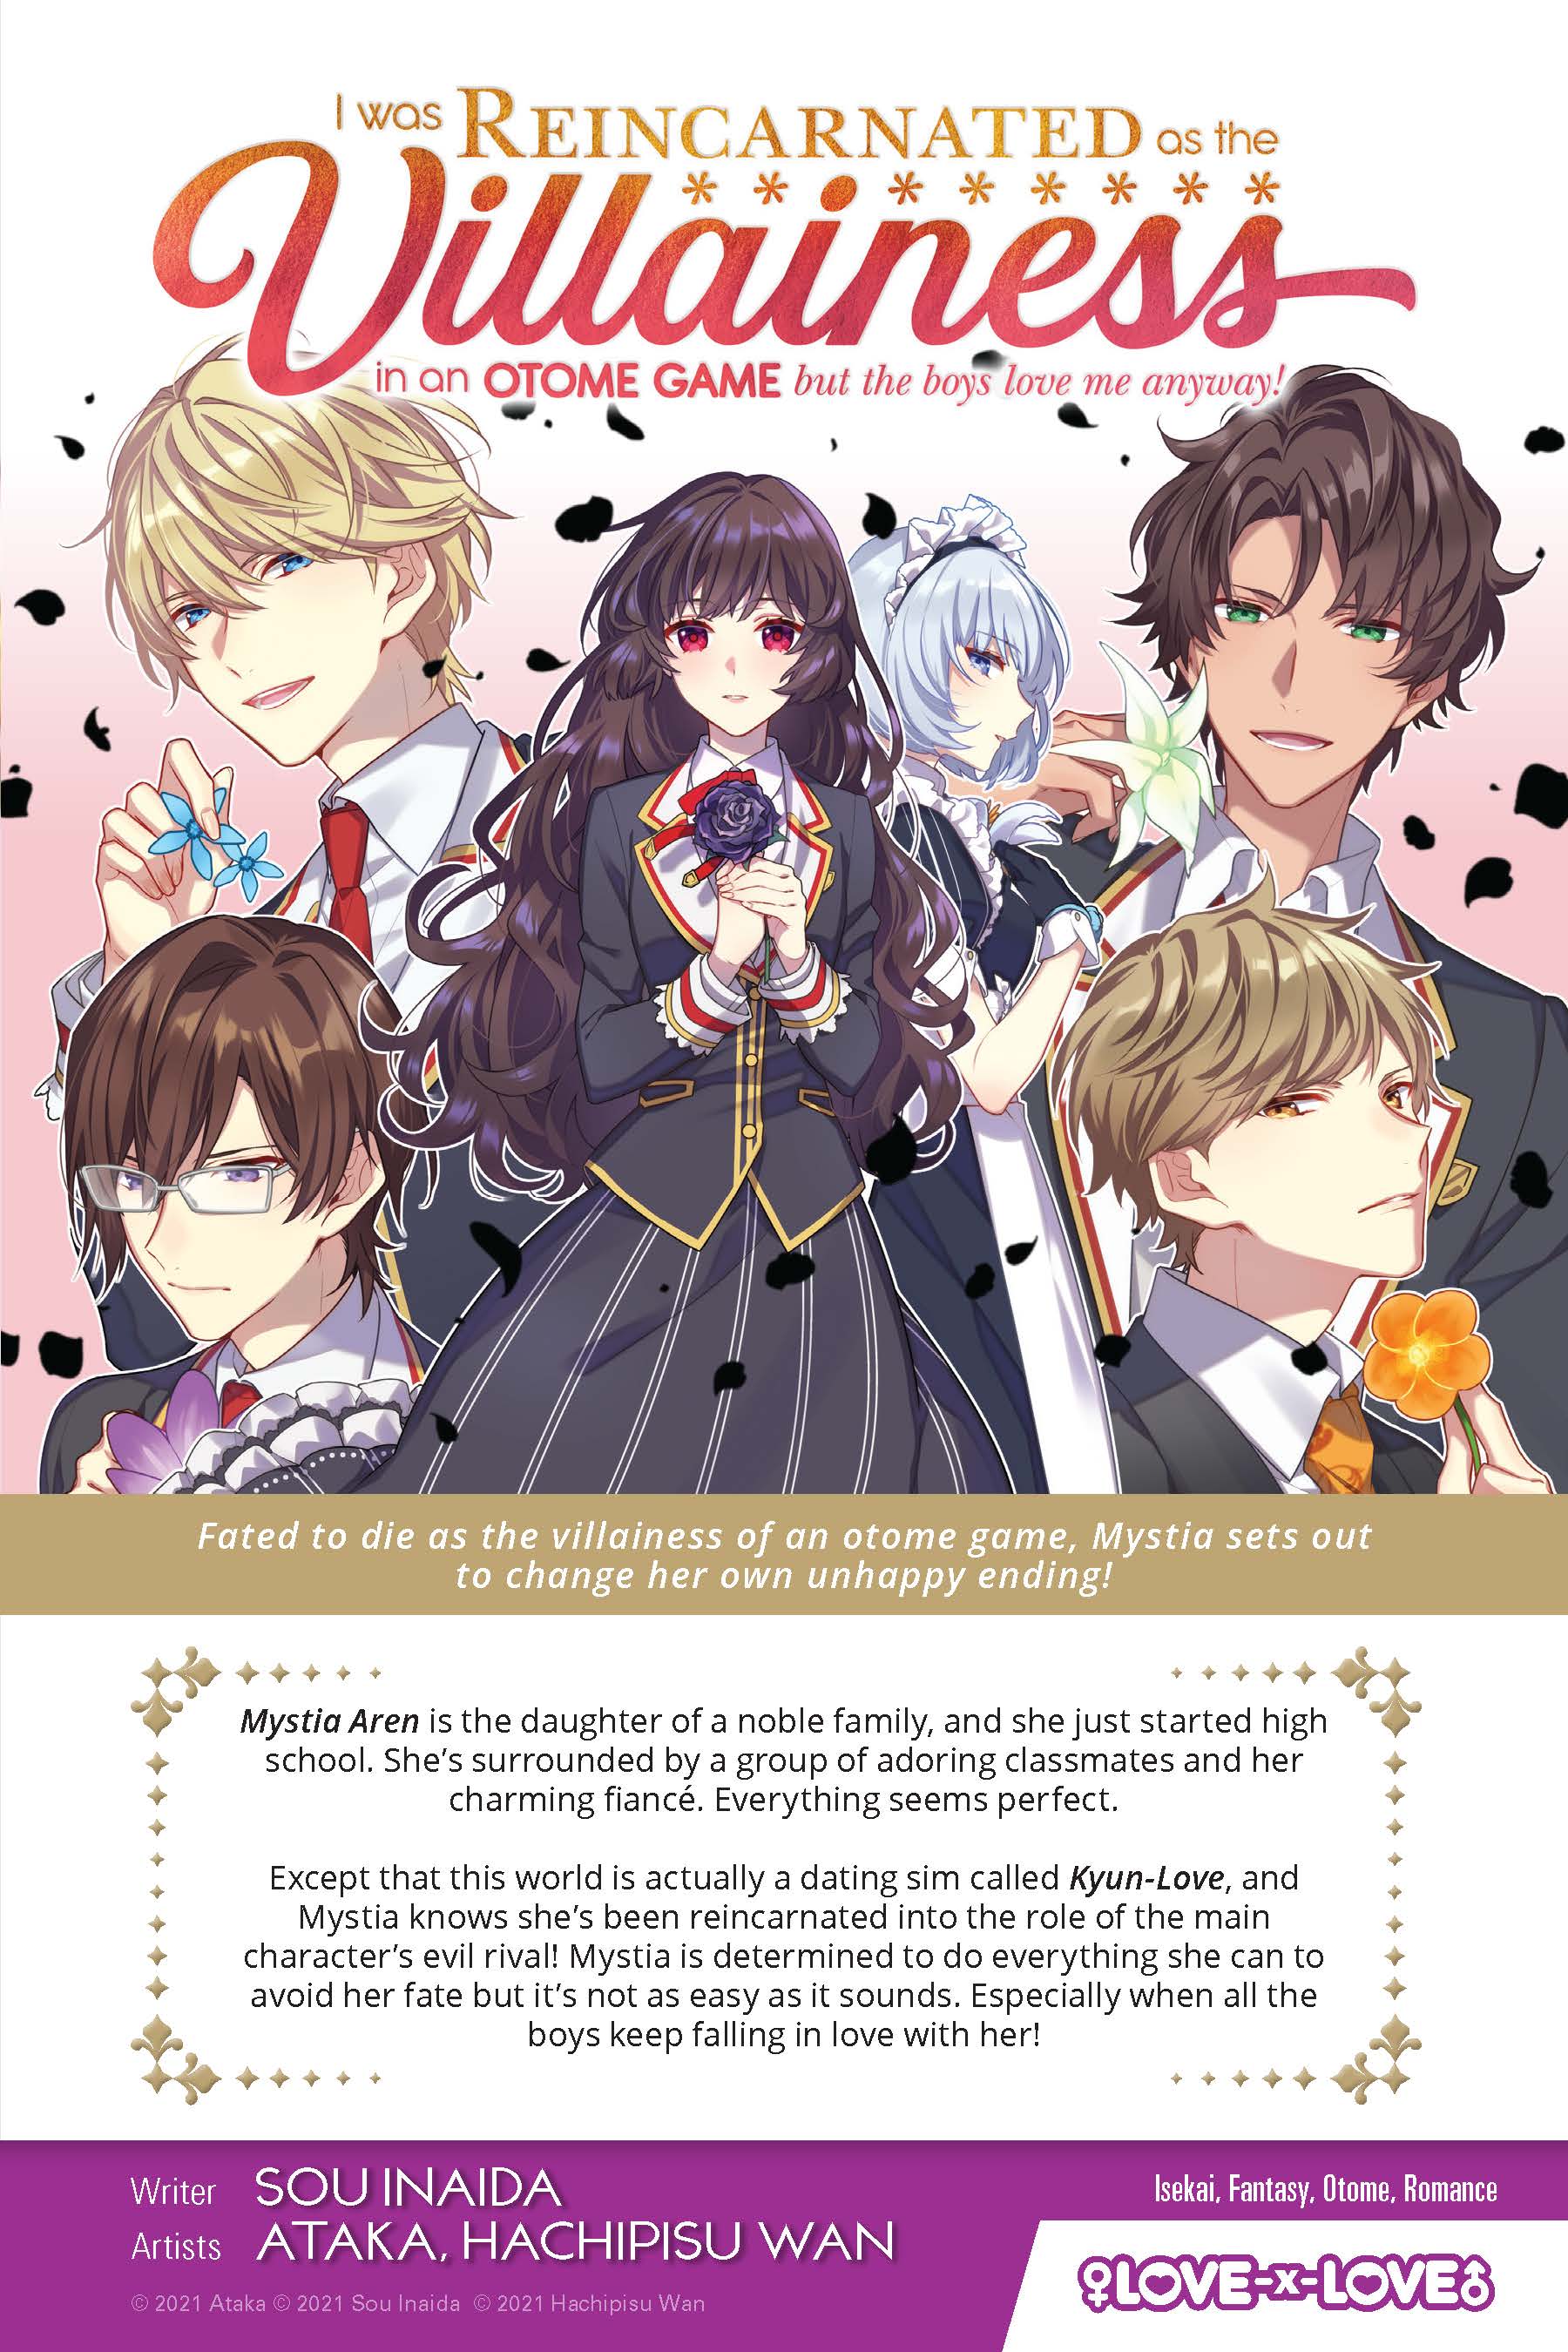 I Reincarnated into an Otome Game as a Villainess With Only